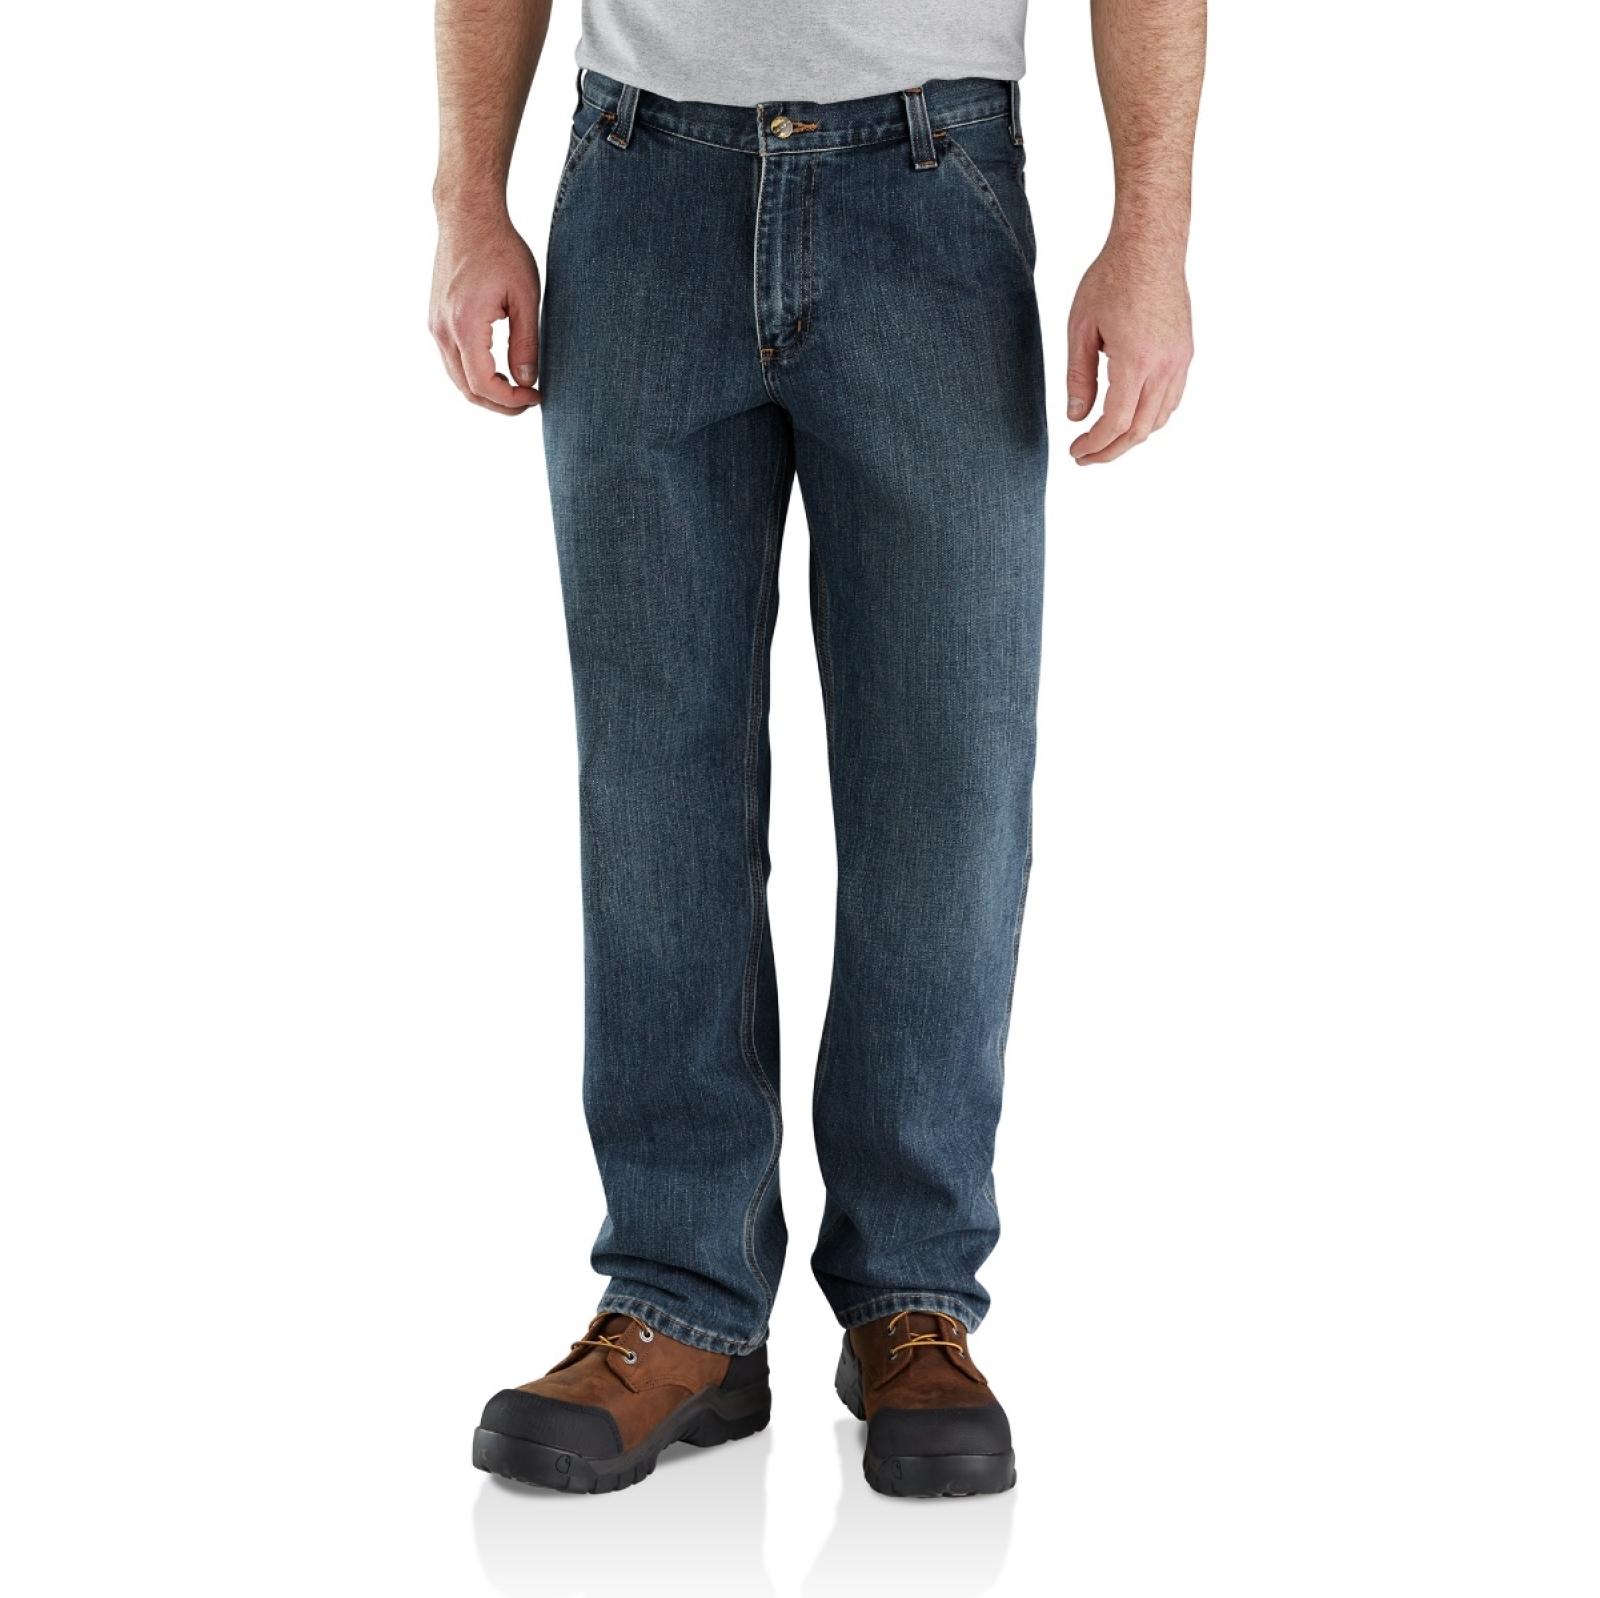 Carhartt Mens Relaxed Fit Holter Dungaree Jean